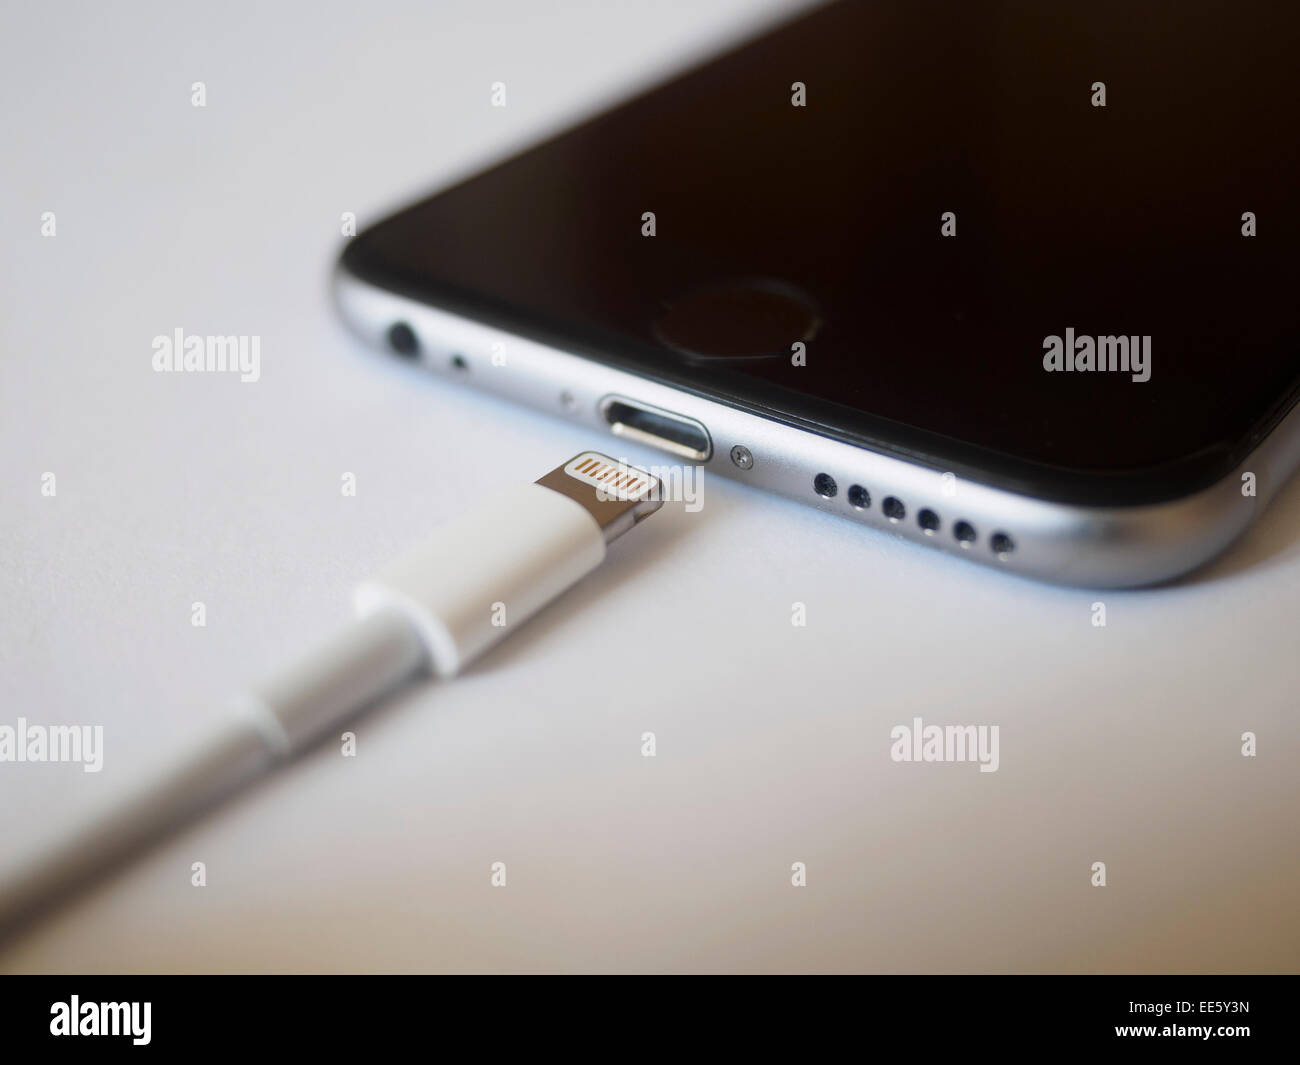 Selective focus photo of the charging cable and lightning port connector of an Apple iPhone 6 smartphone Stock Photo